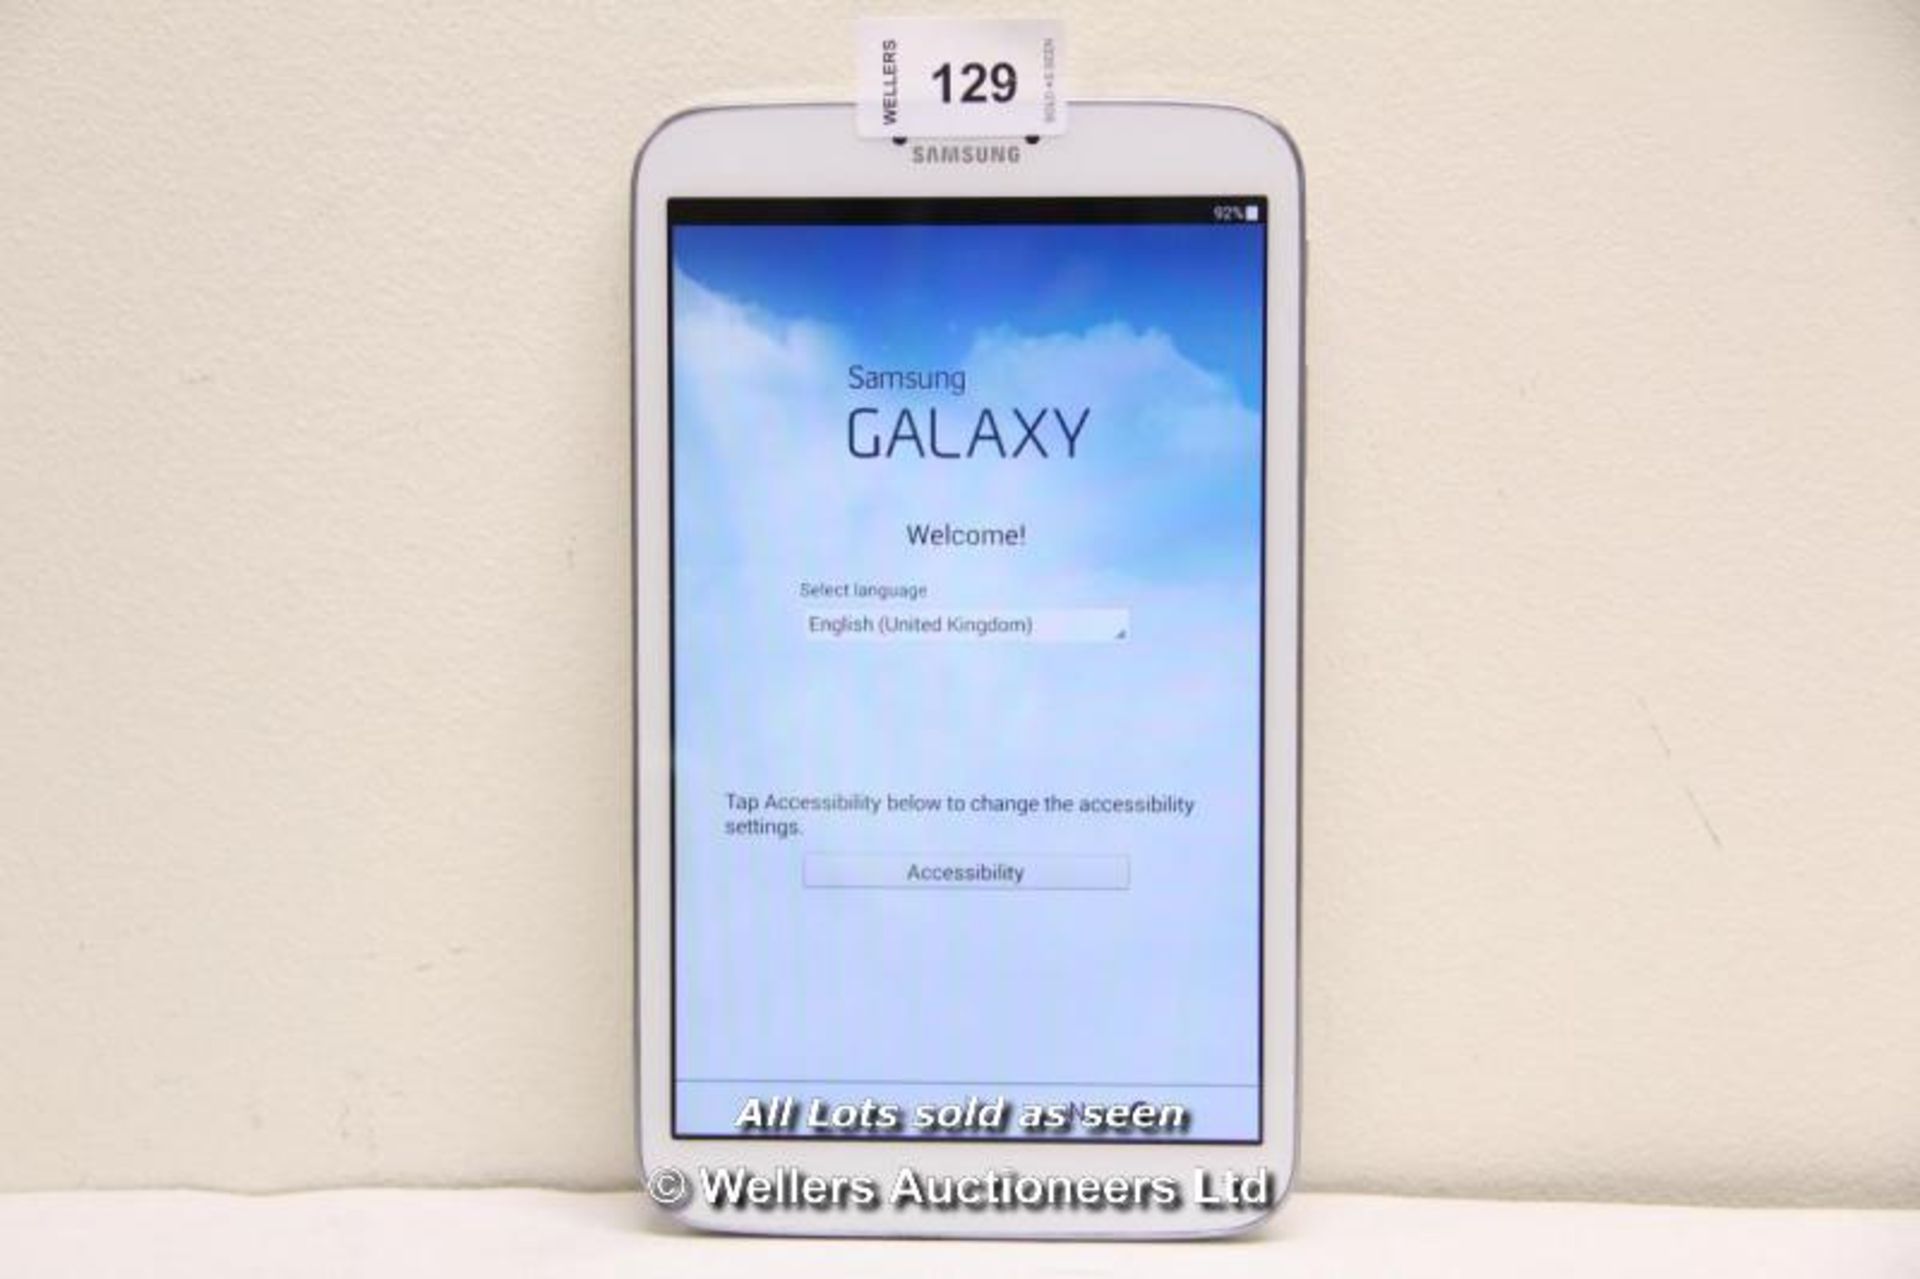 SAMSUNG GALAXY TAB 3 SM-T310 16GB WI-FI  8" - WHITE (36063949) / INCLUDING CHARGER AND USB CABLE /